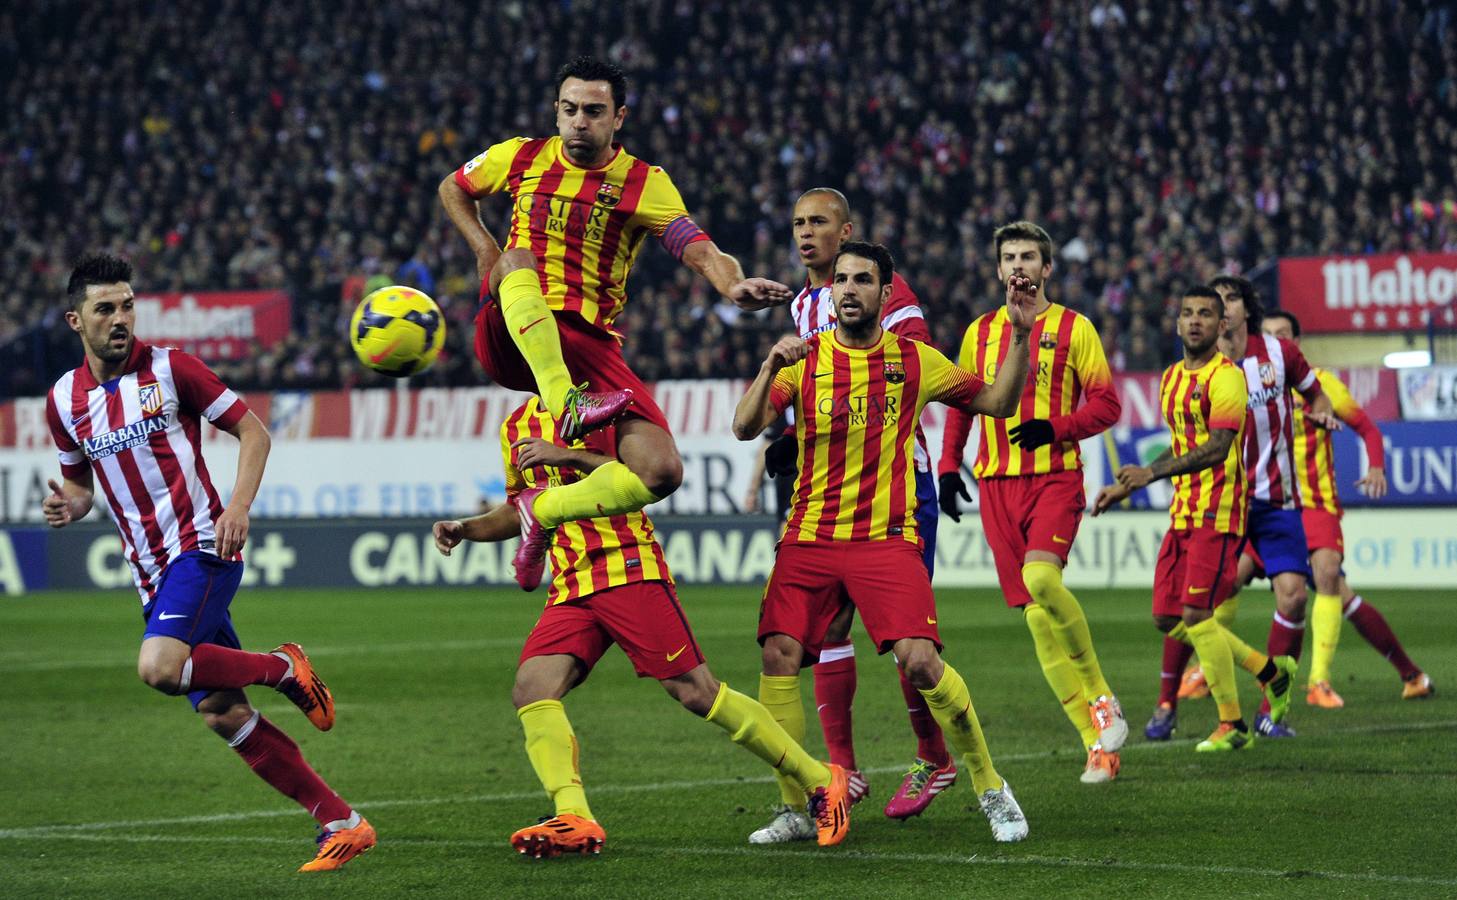 Barcelona and Atlético de Madrid will play it in the last League match.